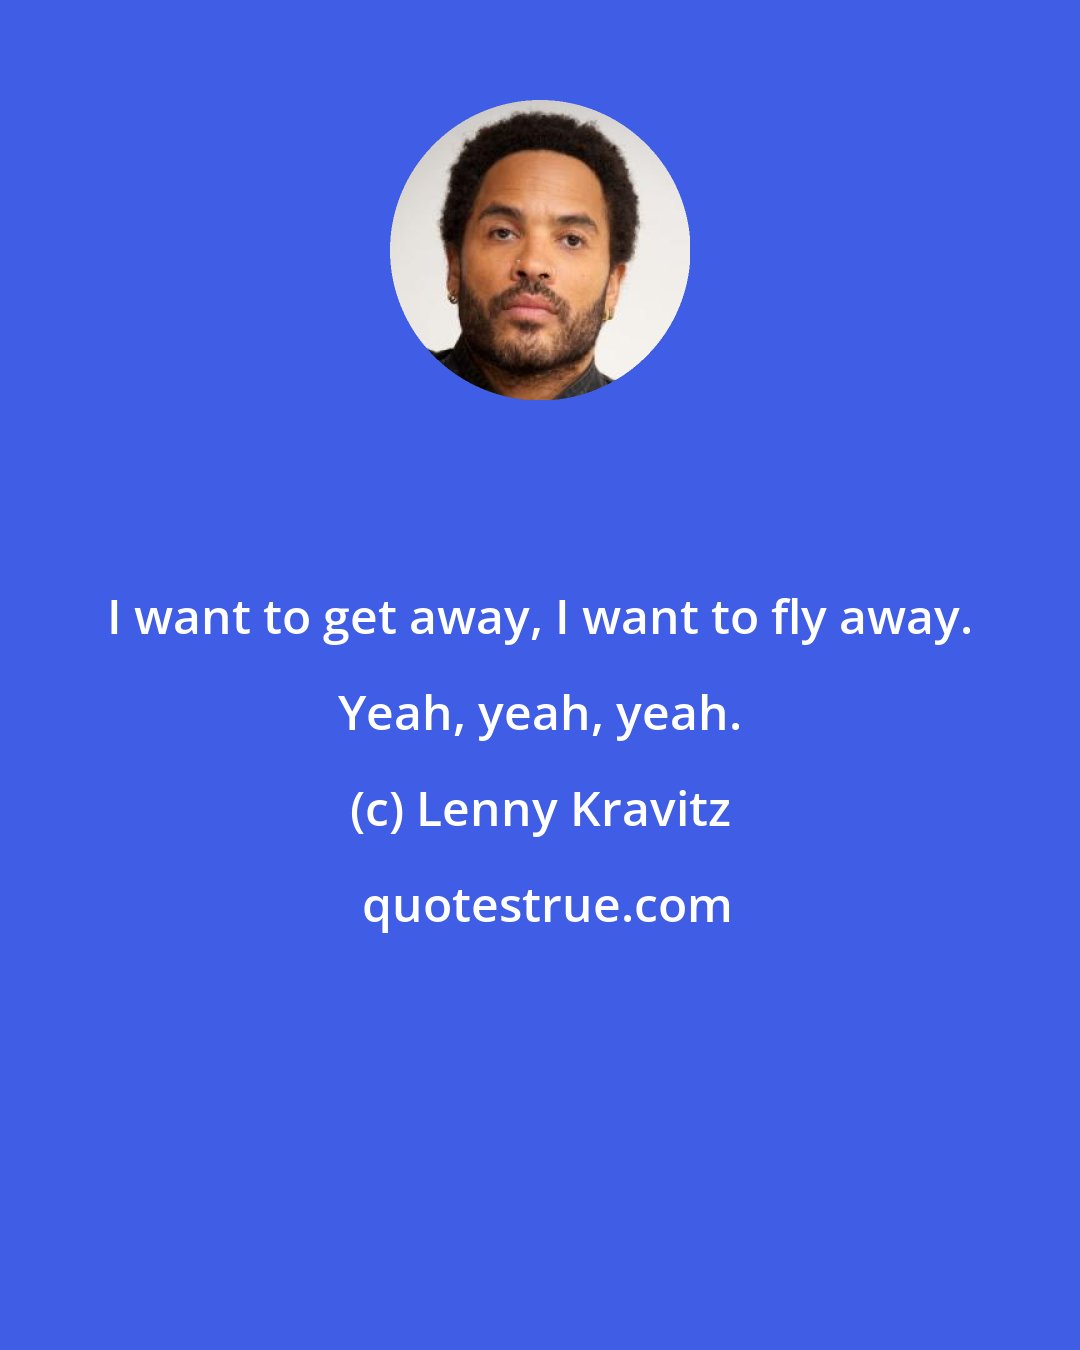 Lenny Kravitz: I want to get away, I want to fly away. Yeah, yeah, yeah.